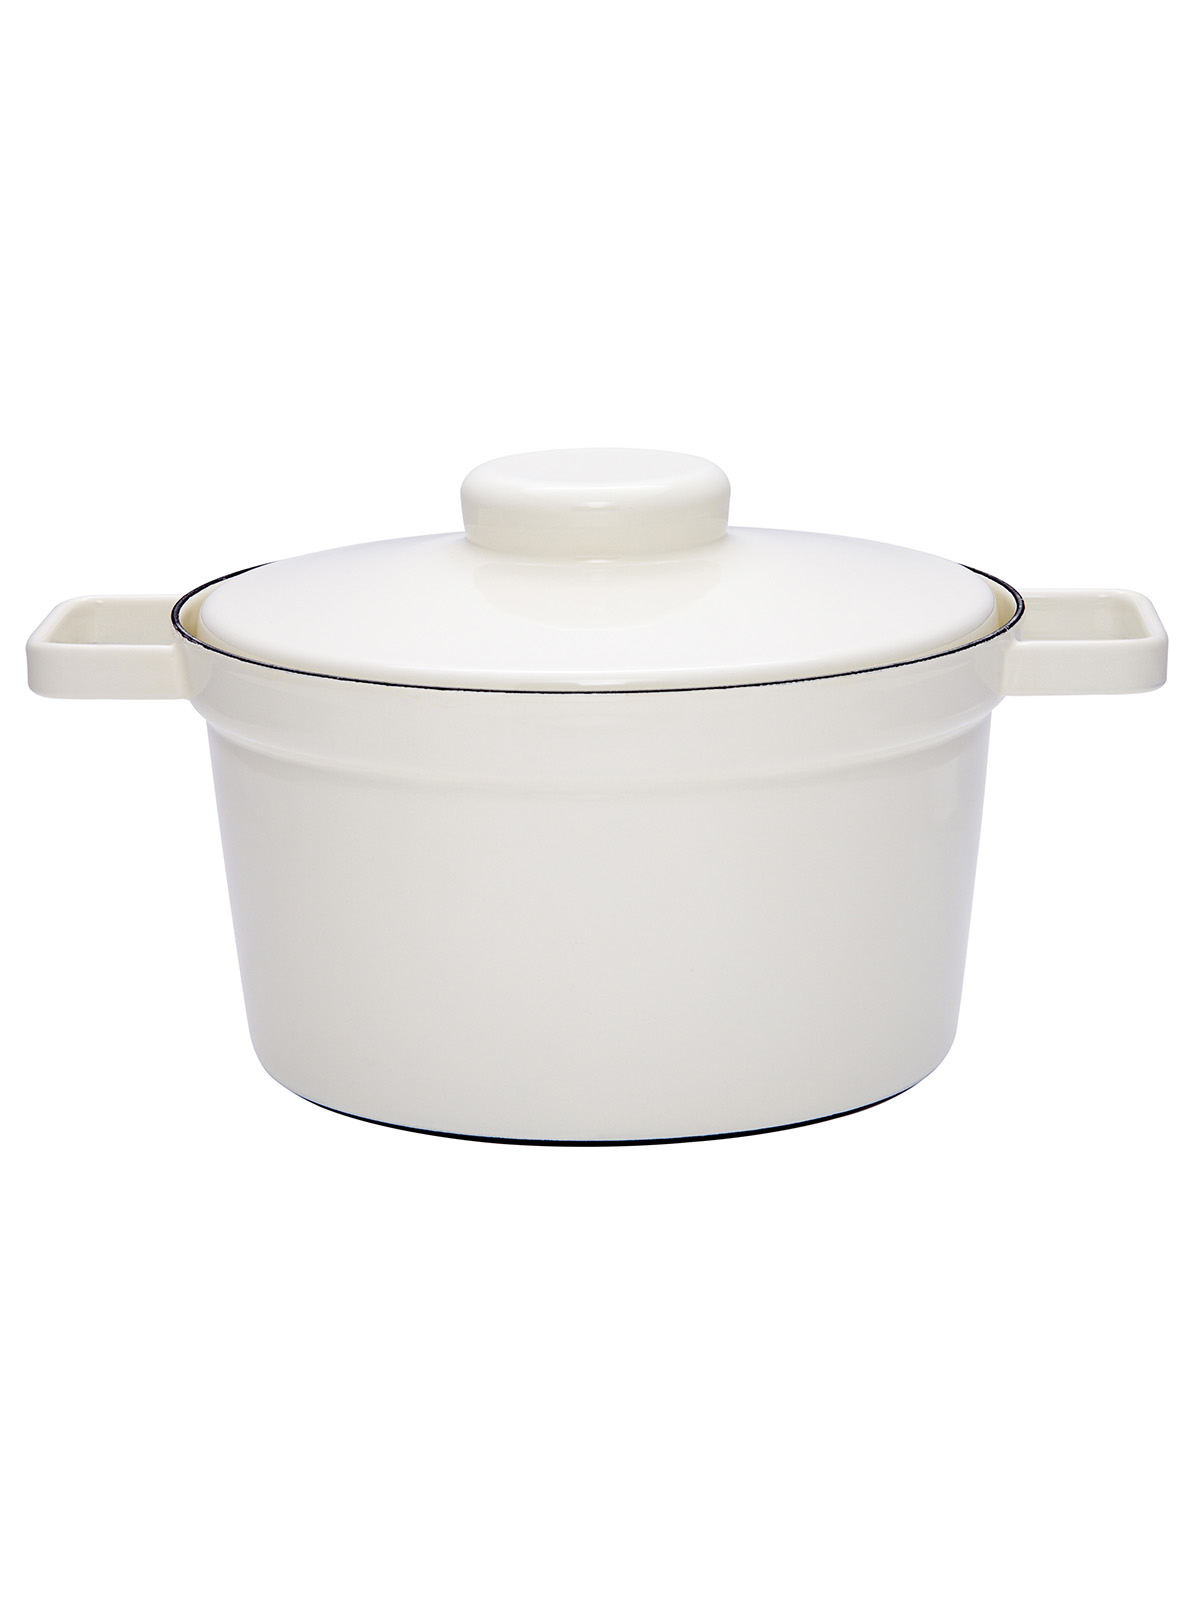 Casserol with cover 24cm, white, 3.5 liter